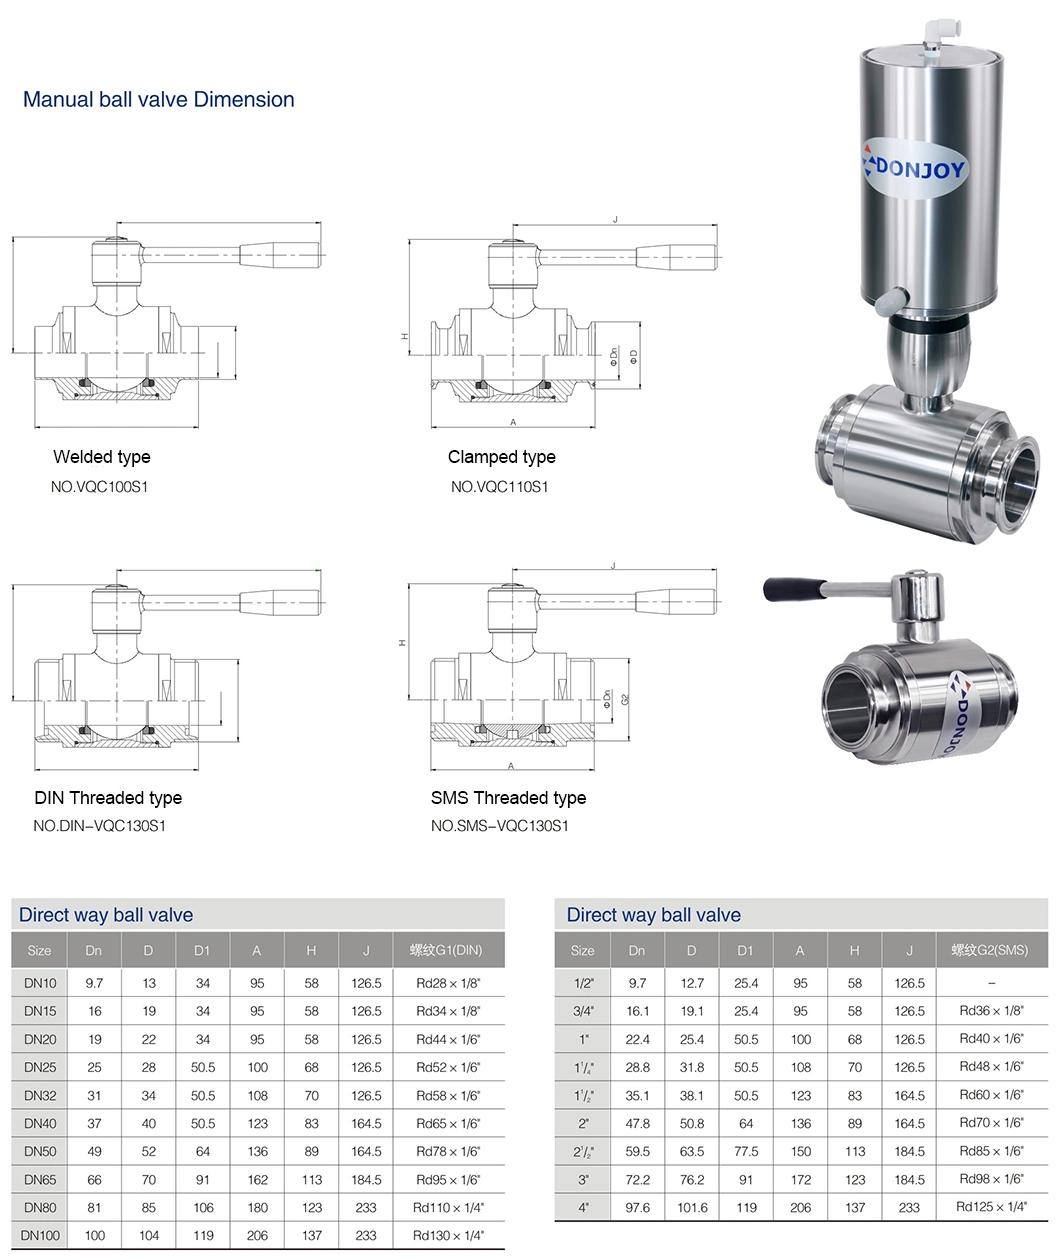 Donjoy Hygienic Ball Valve with Plastic Handle